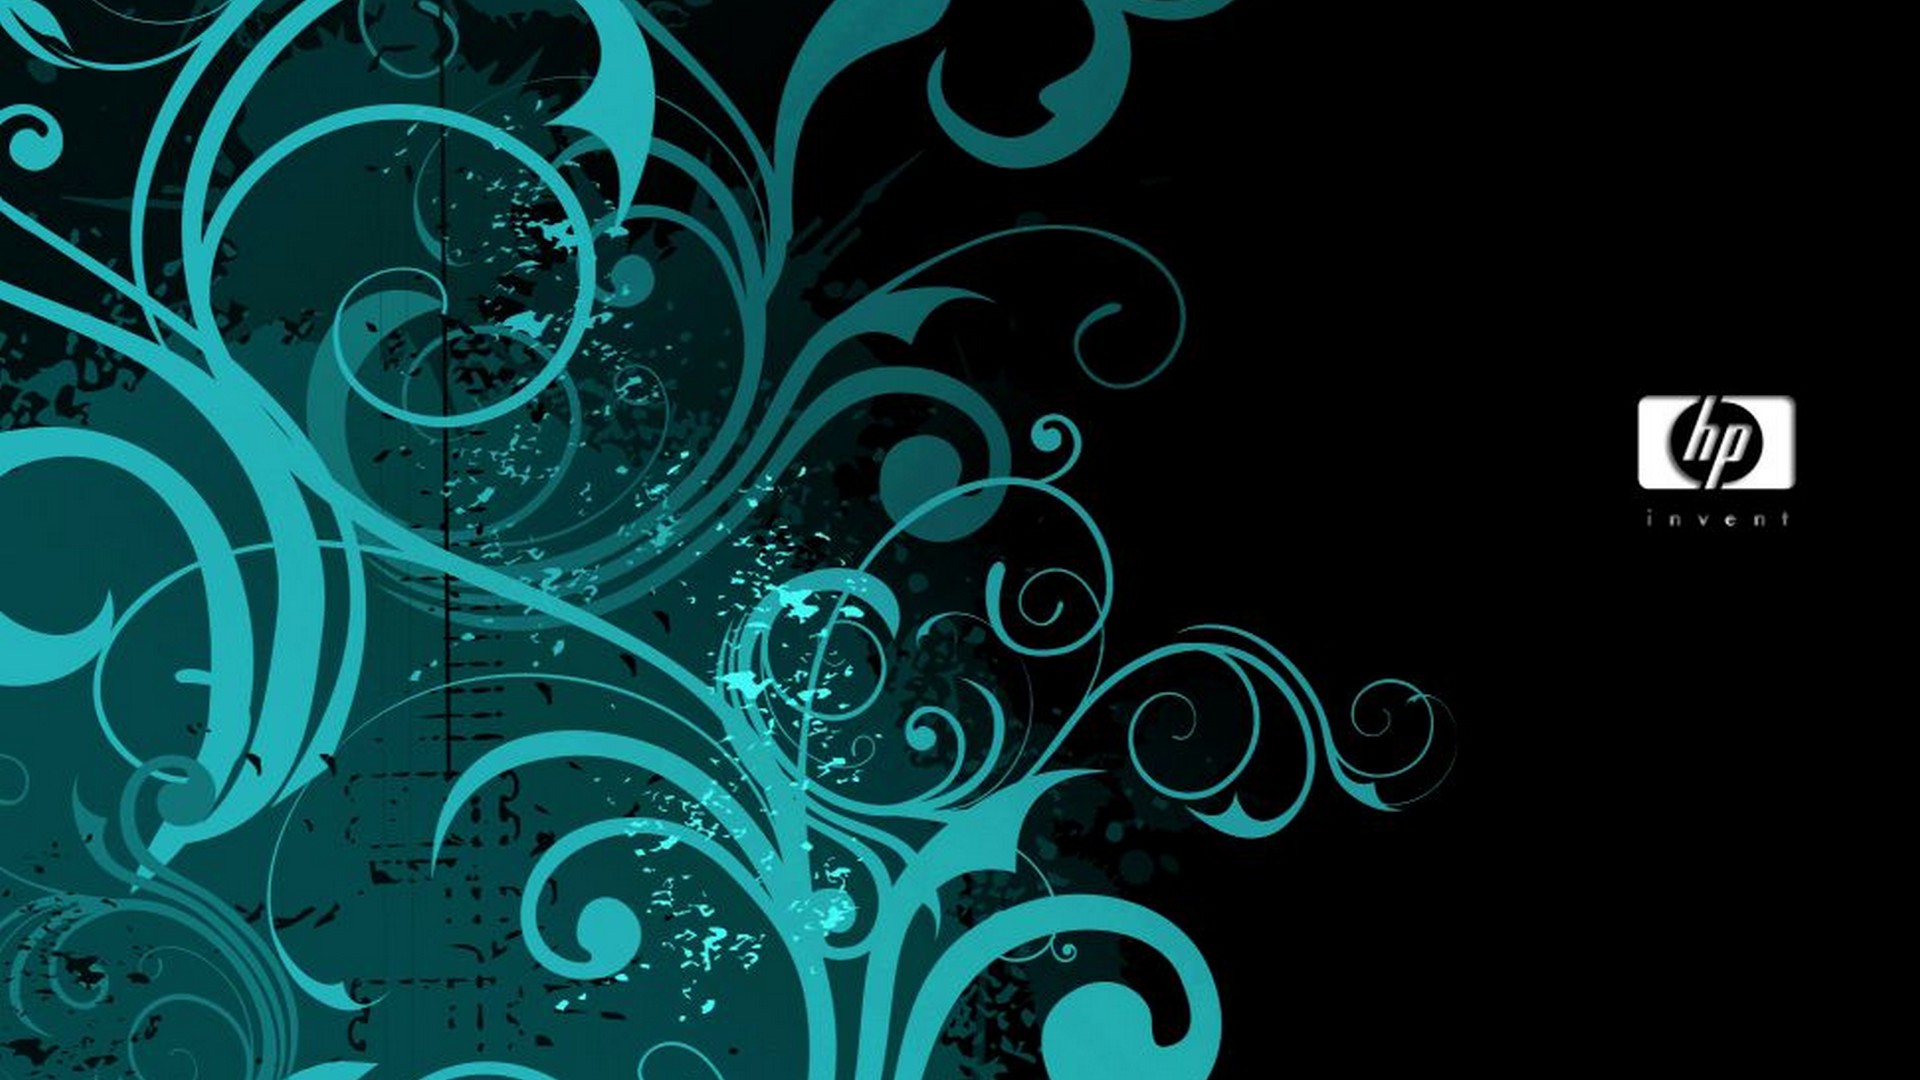 Teal Wallpaper For Desktop with image resolution 1920x1080 pixel. You can use this wallpaper as background for your desktop Computer Screensavers, Android or iPhone smartphones